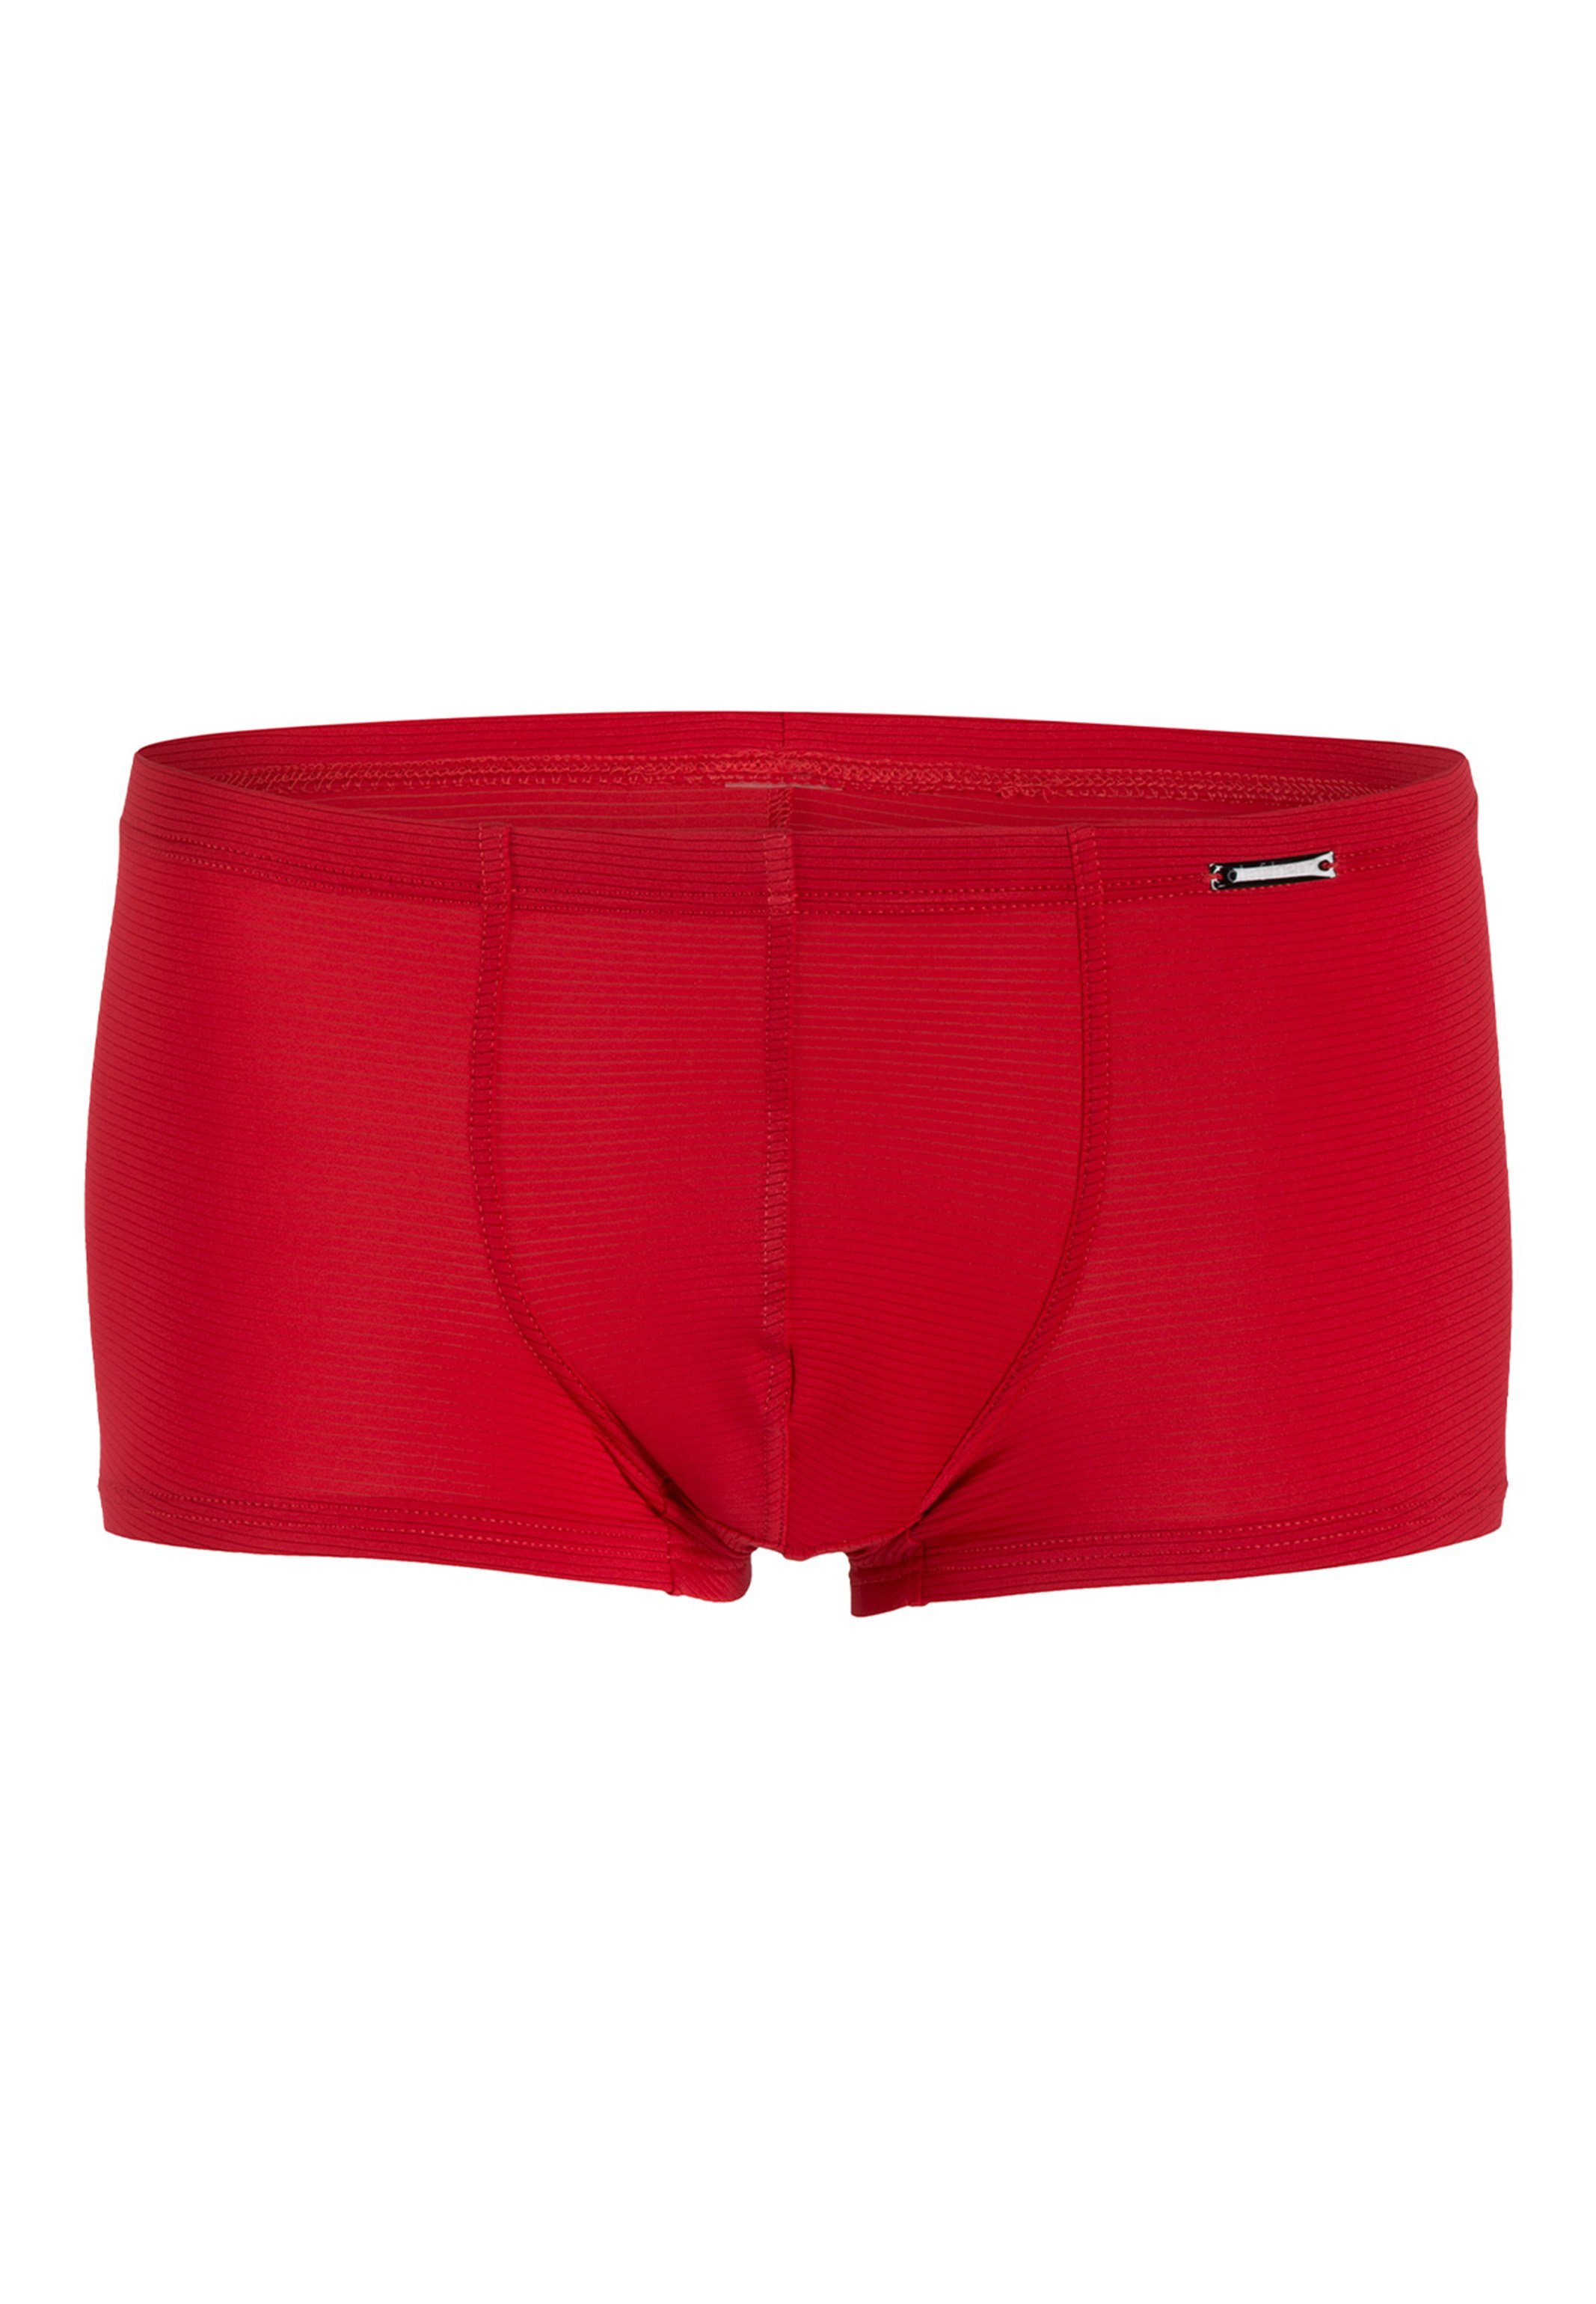 Olaf Benz Pant Eingriff - / Rot Mikrofaser Retro (1-St) Boxer Ohne Hipster Luftige RED1201 Minipants 